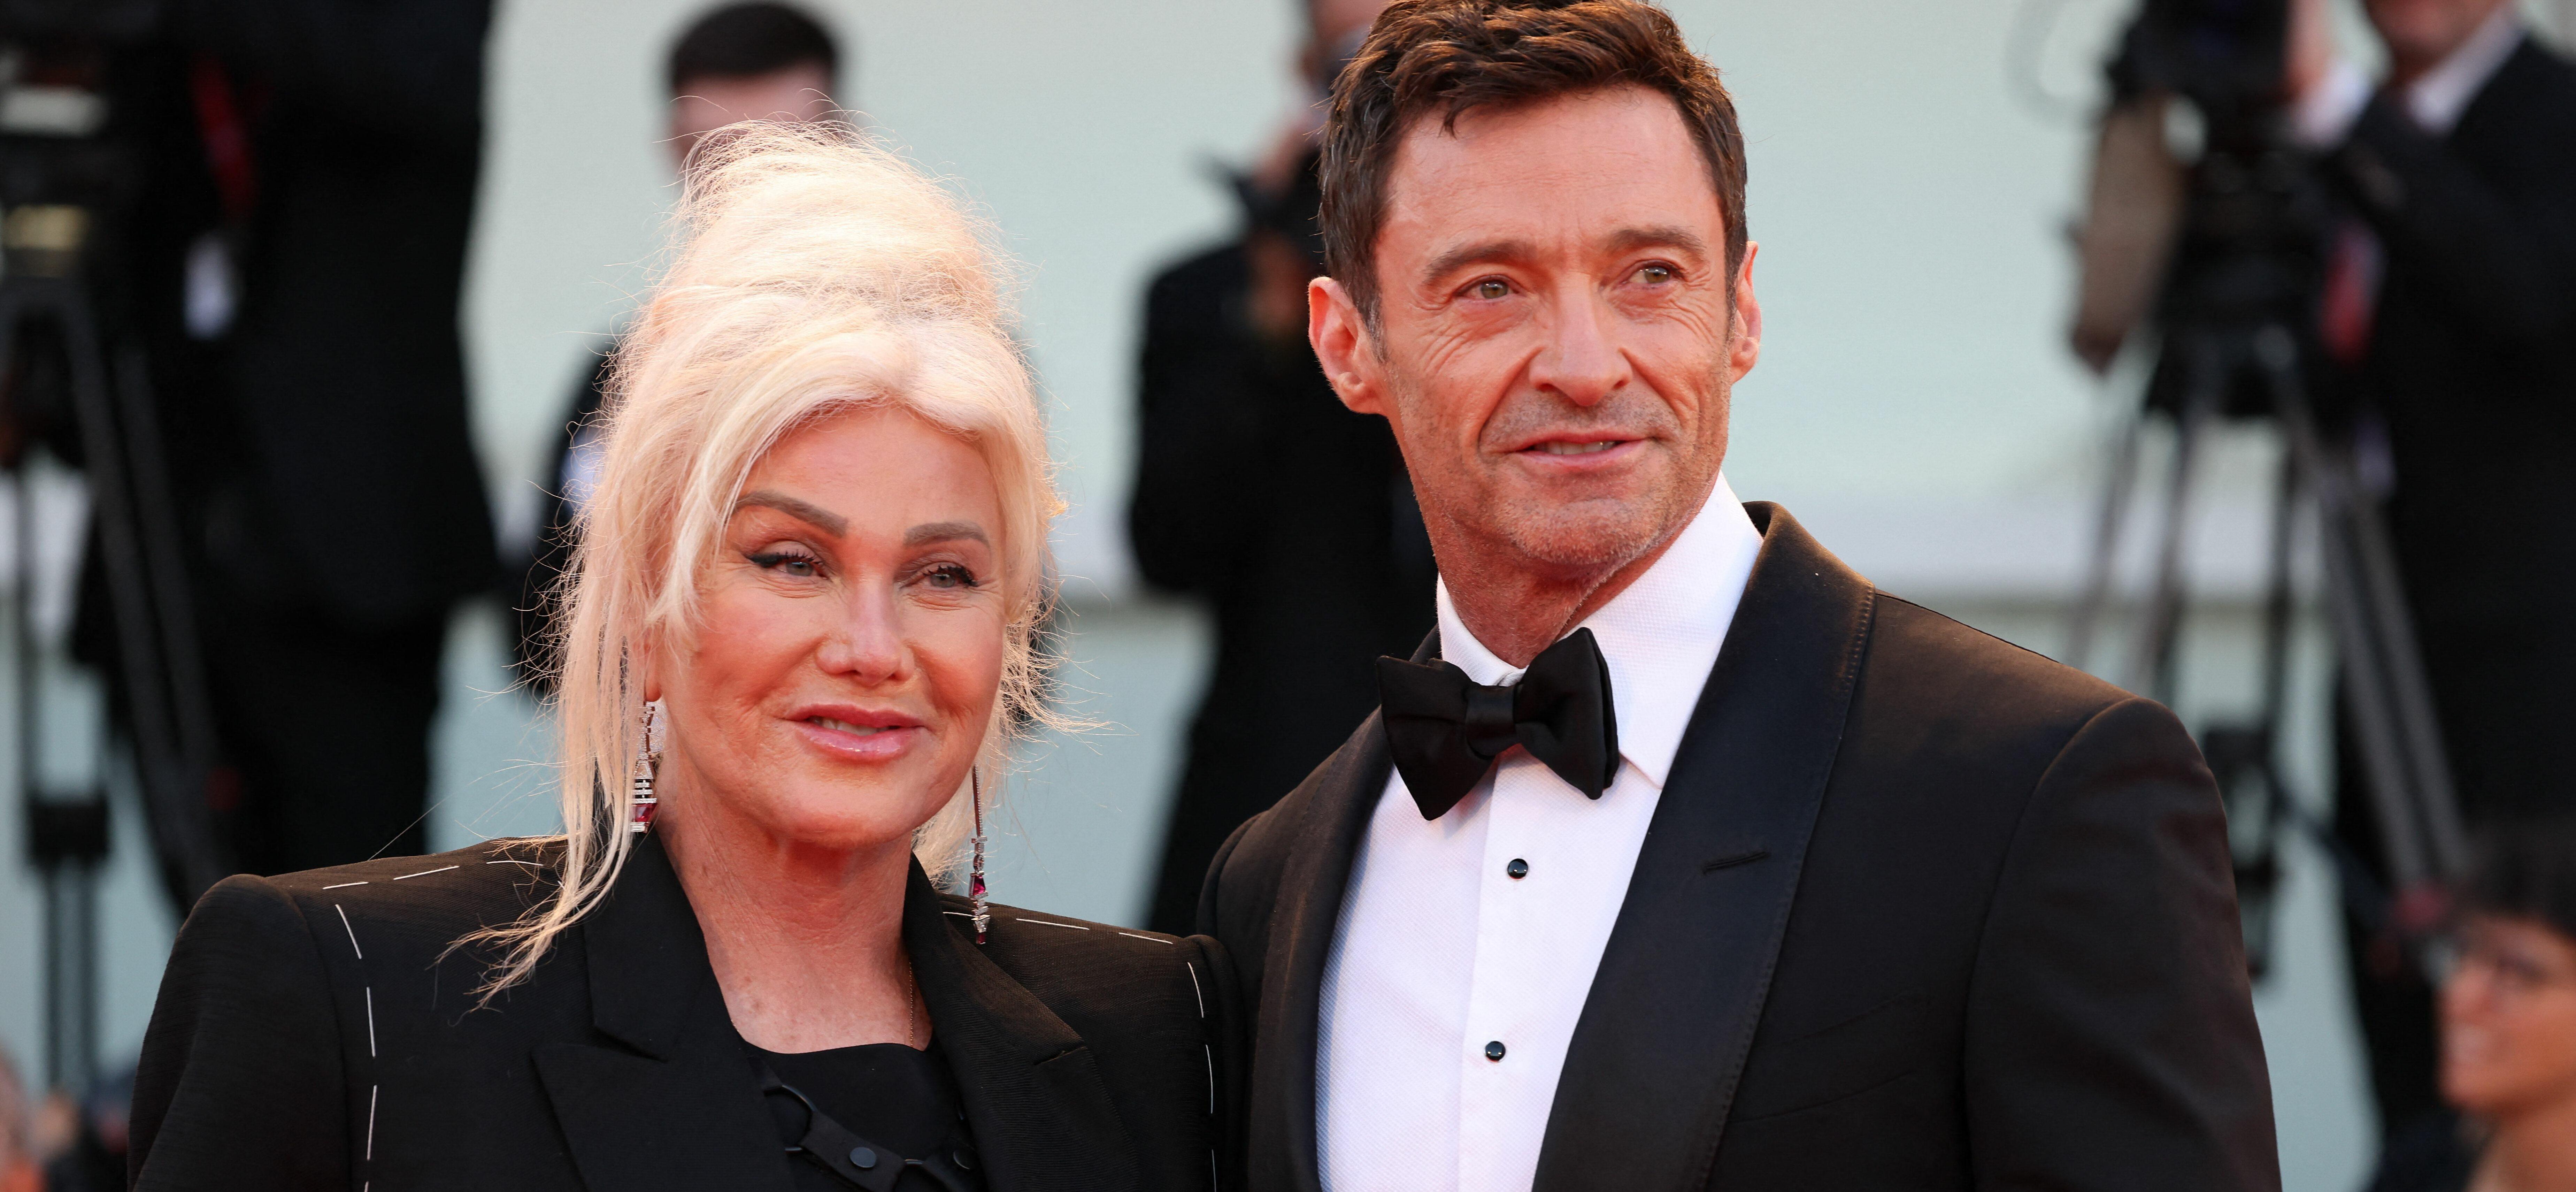 Hugh Jackman Allegedly Wants Estranged Wife To Sign ‘Ironclad’ NDA Amid Divorce To Protect His ‘Secrets’